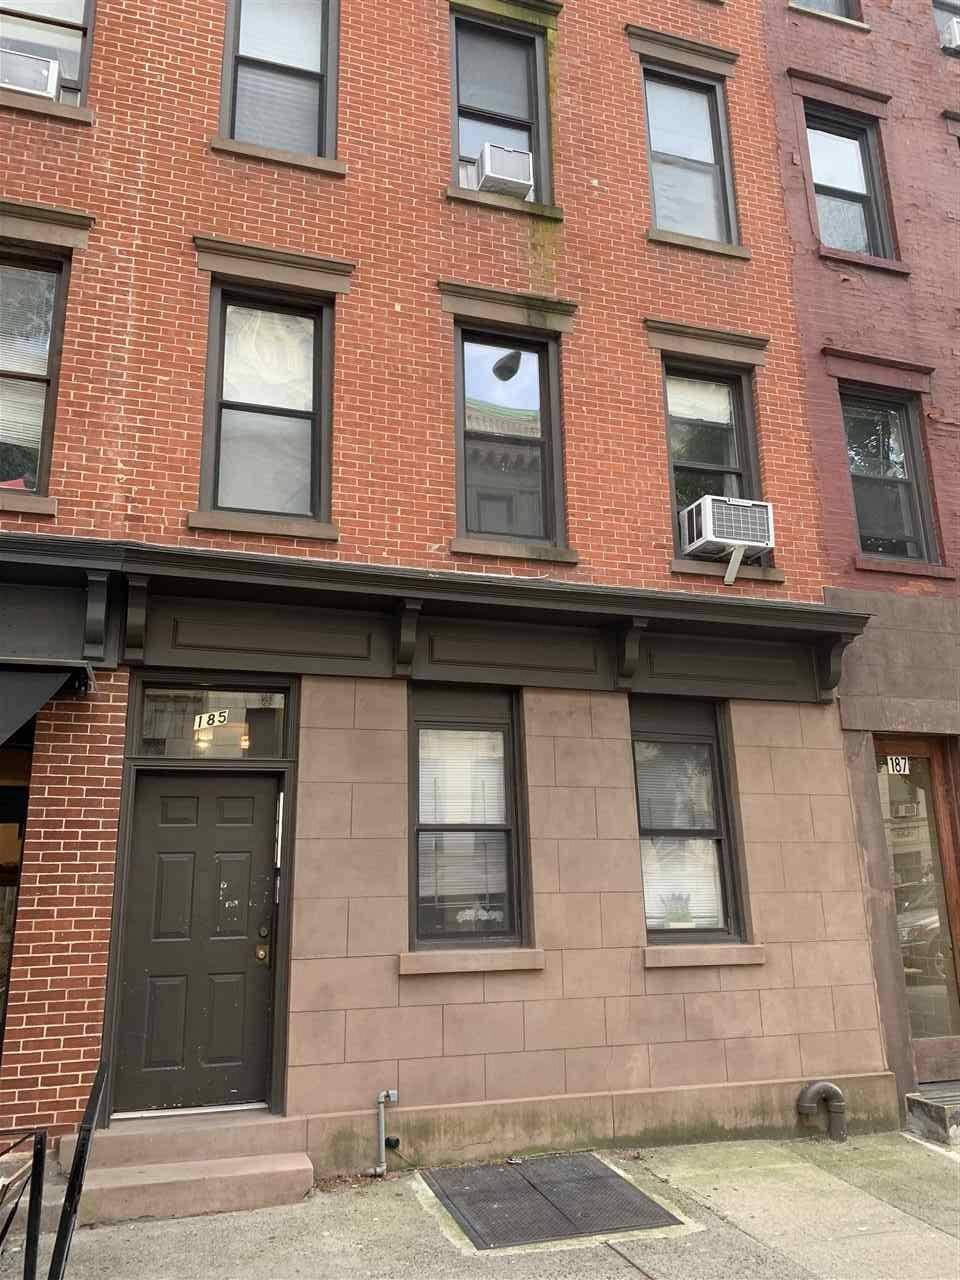 185 MONTGOMERY ST Multi-Family New Jersey